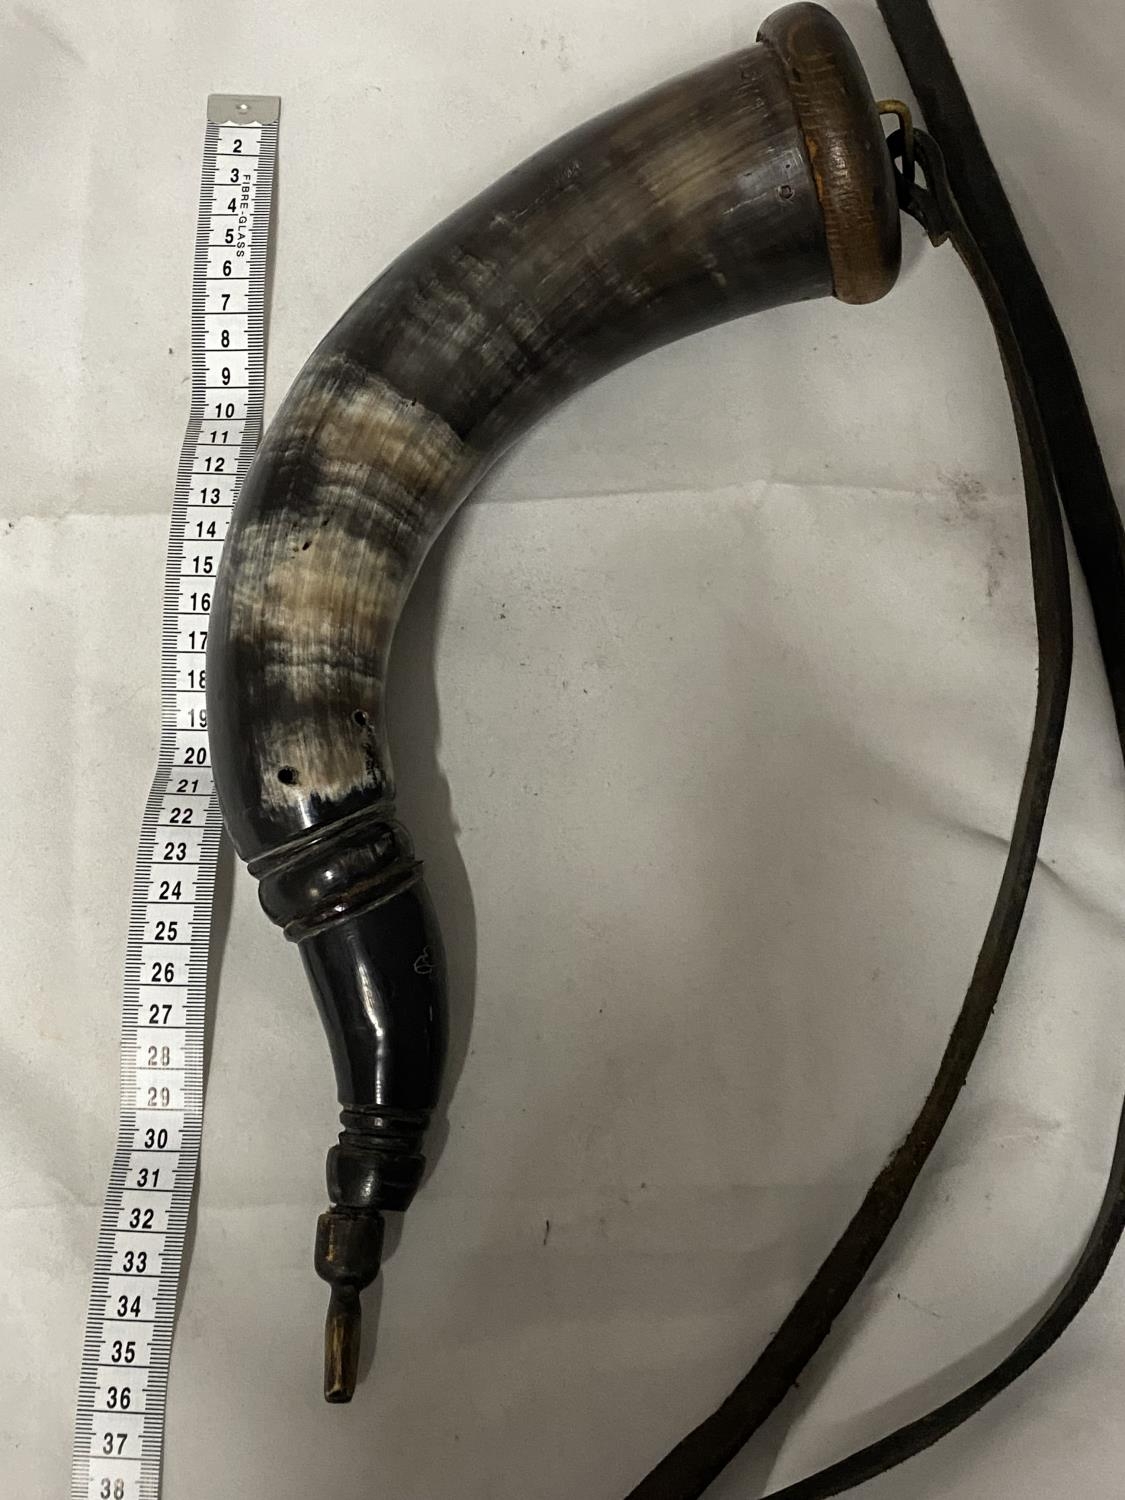 A vintage black powder horn with leather strap (needs re-attaching one end)